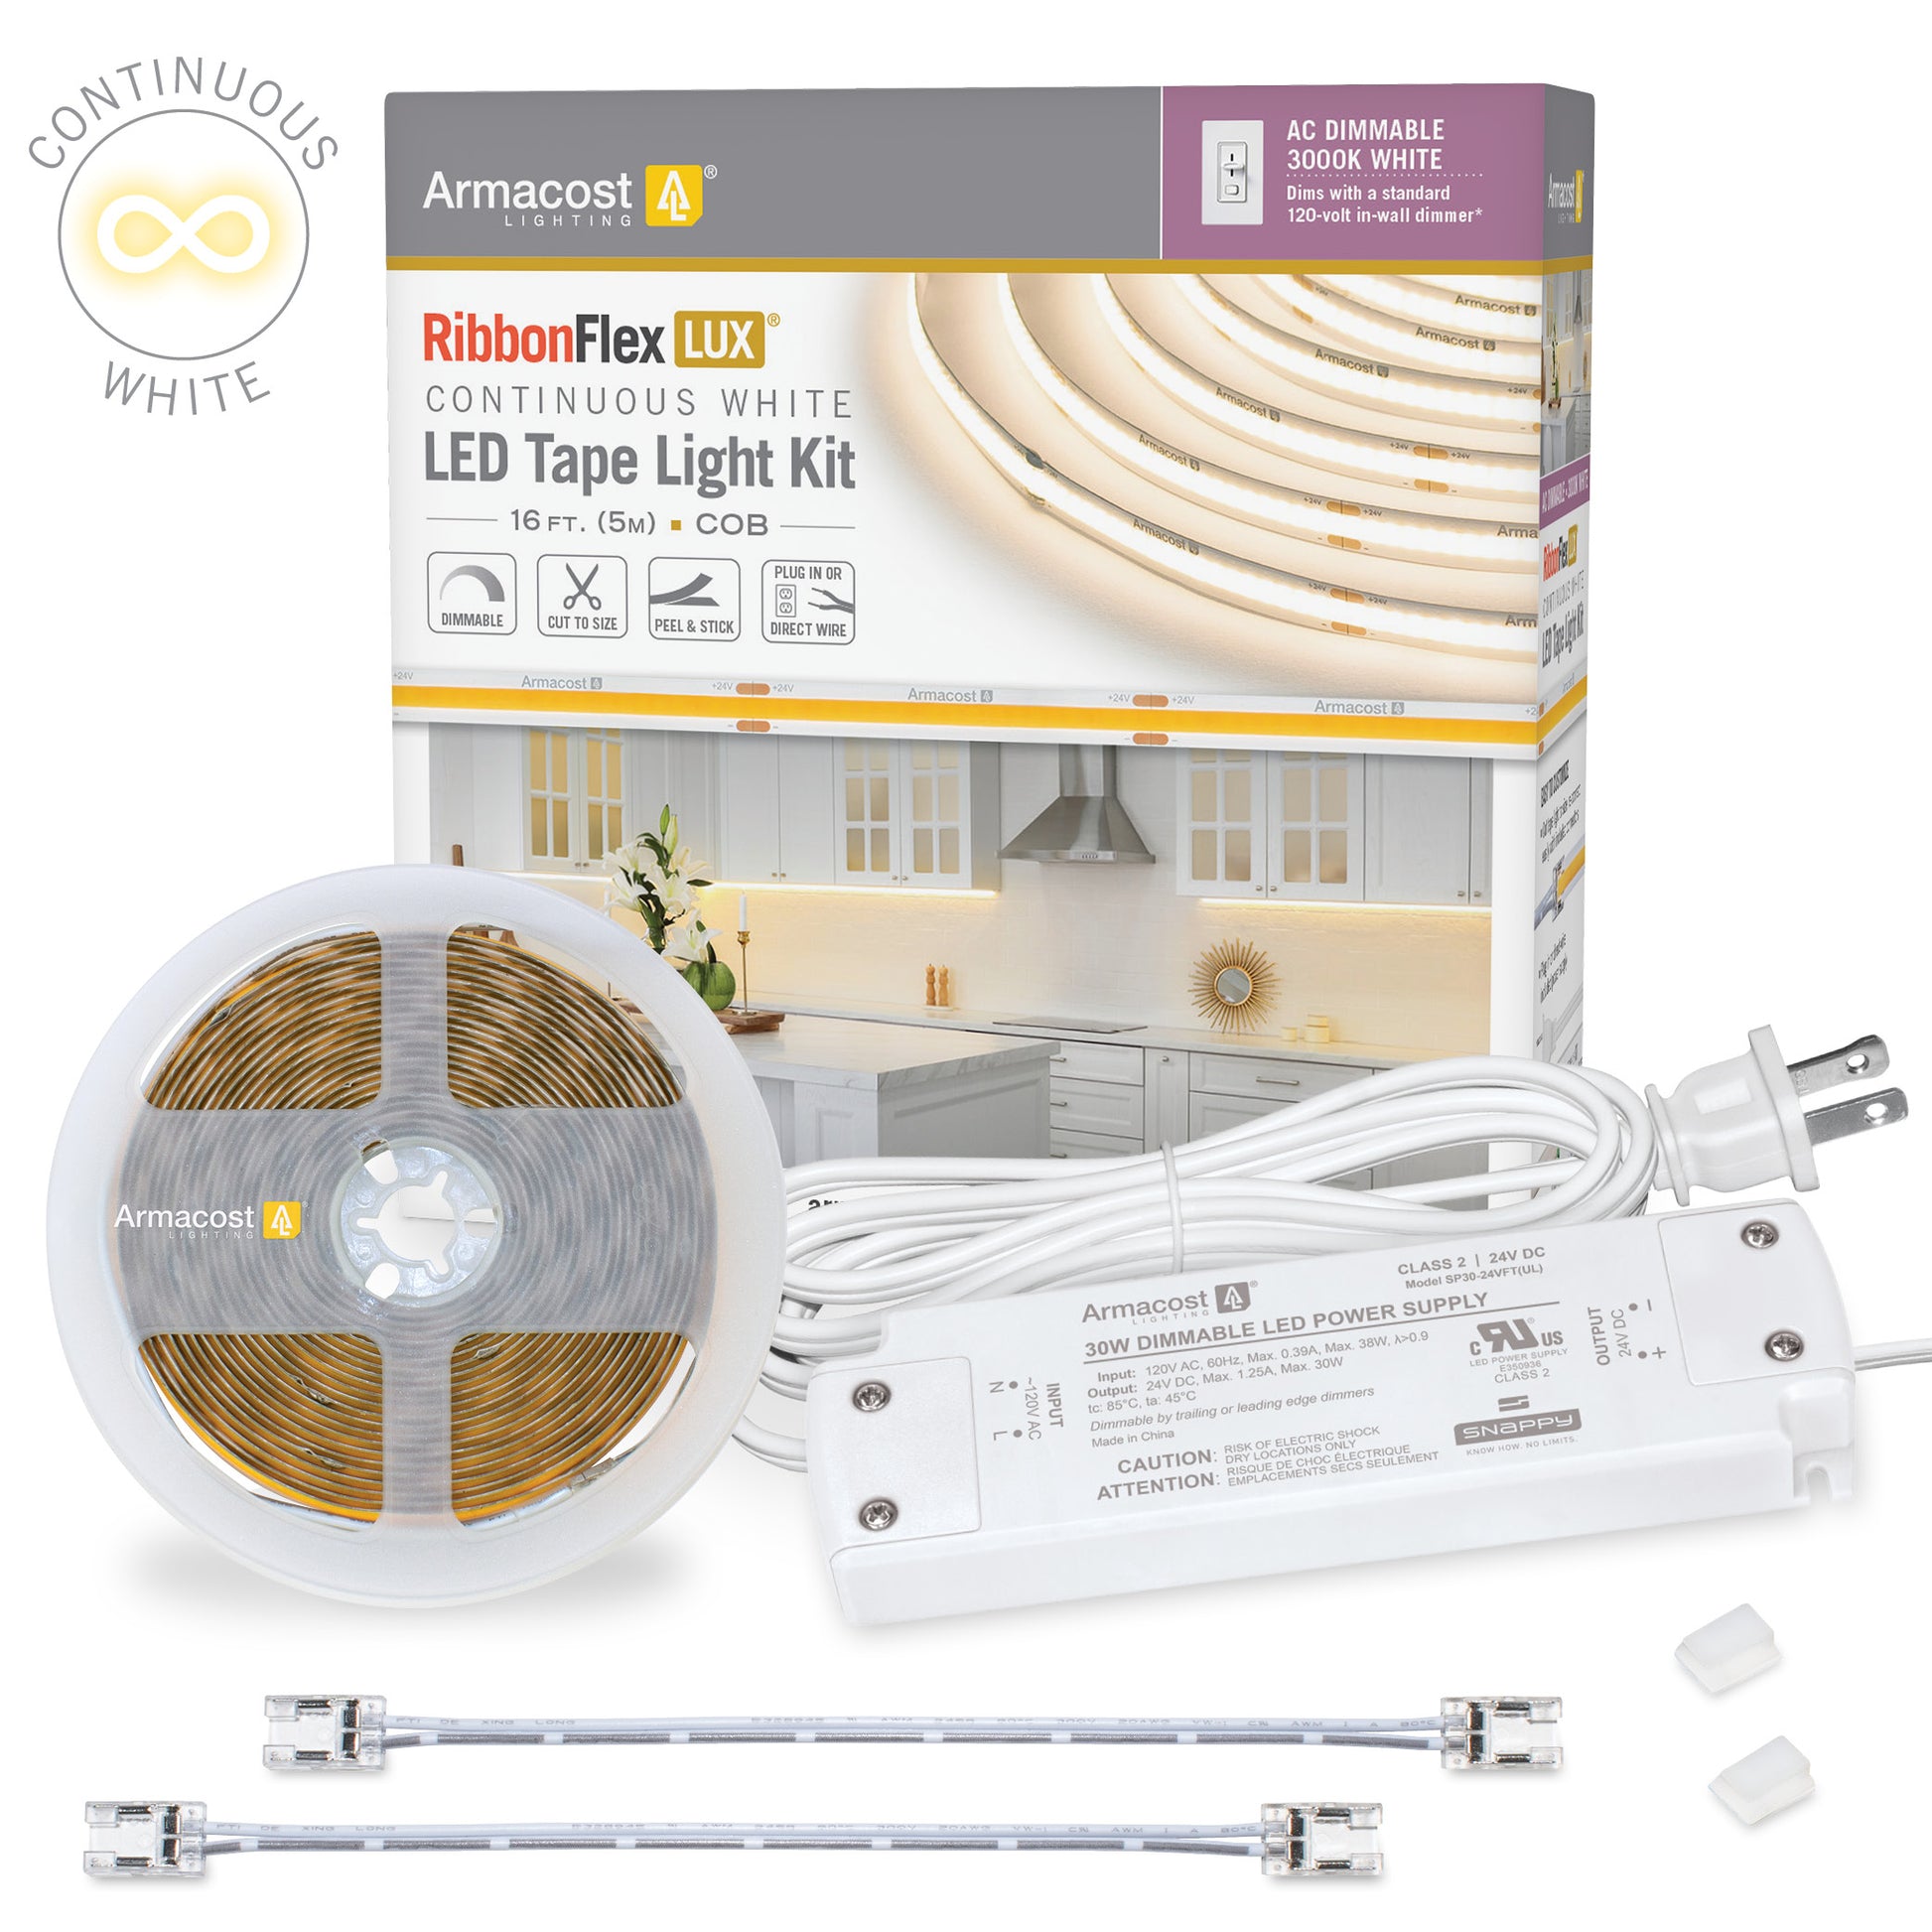 RibbonFlex LUX White COB AC Dimmable LED Tape Light Kit – Armacost